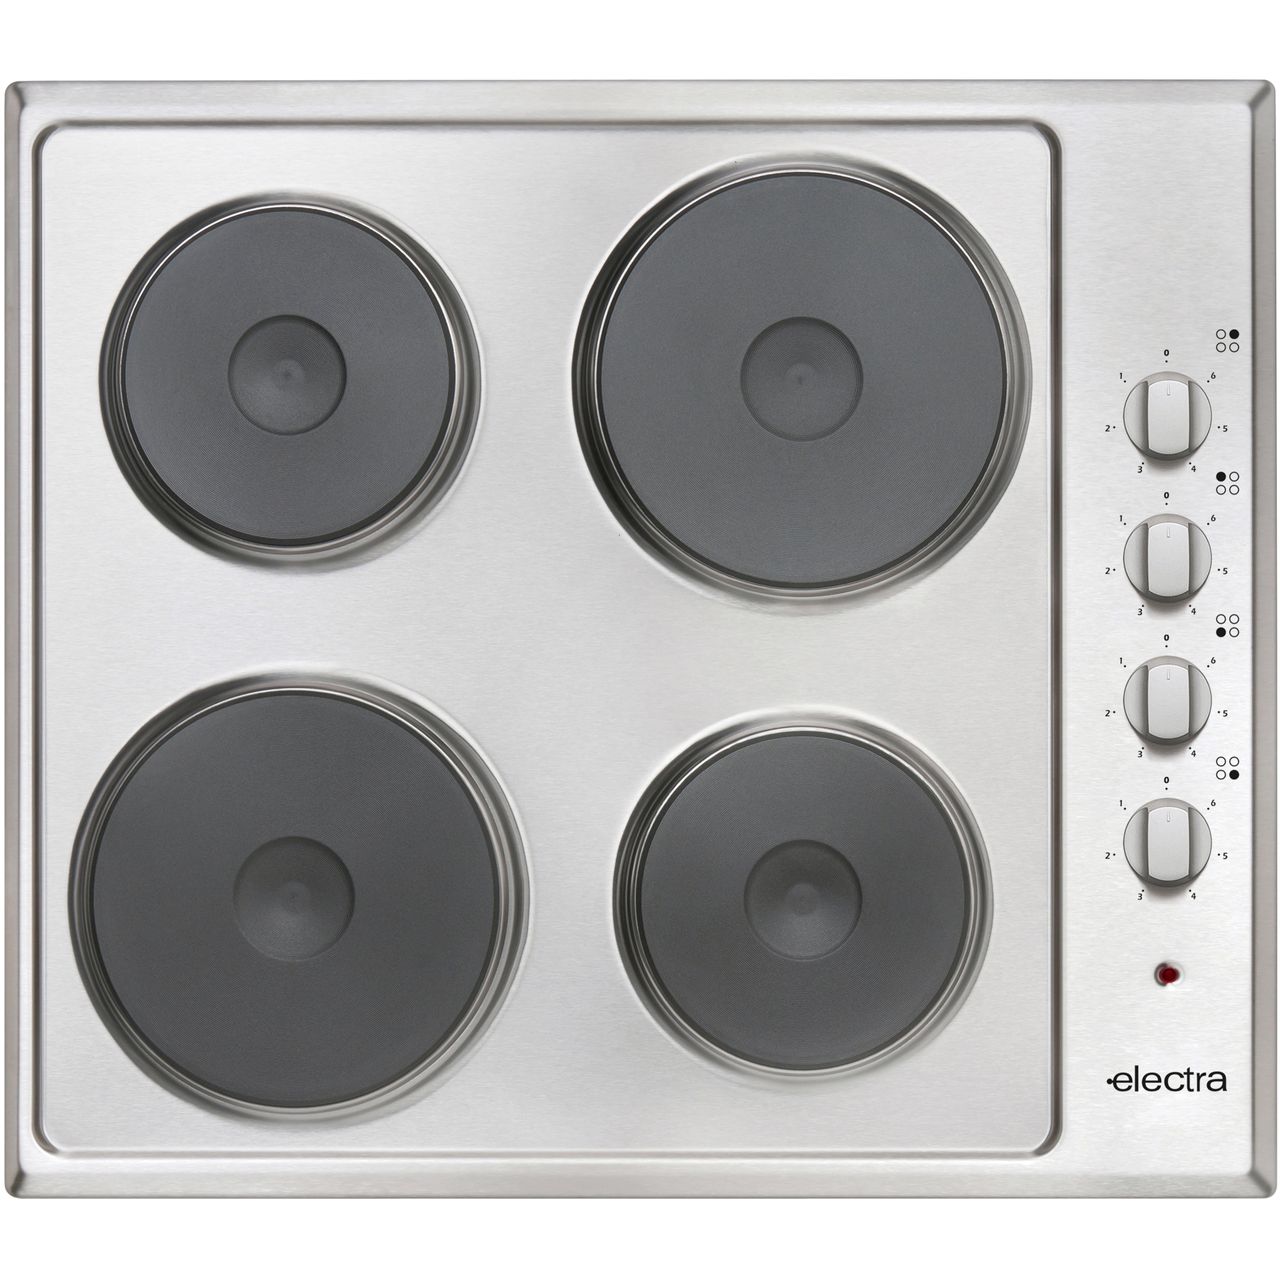 Electra BISH4SS 58cm Solid Plate Hob Review